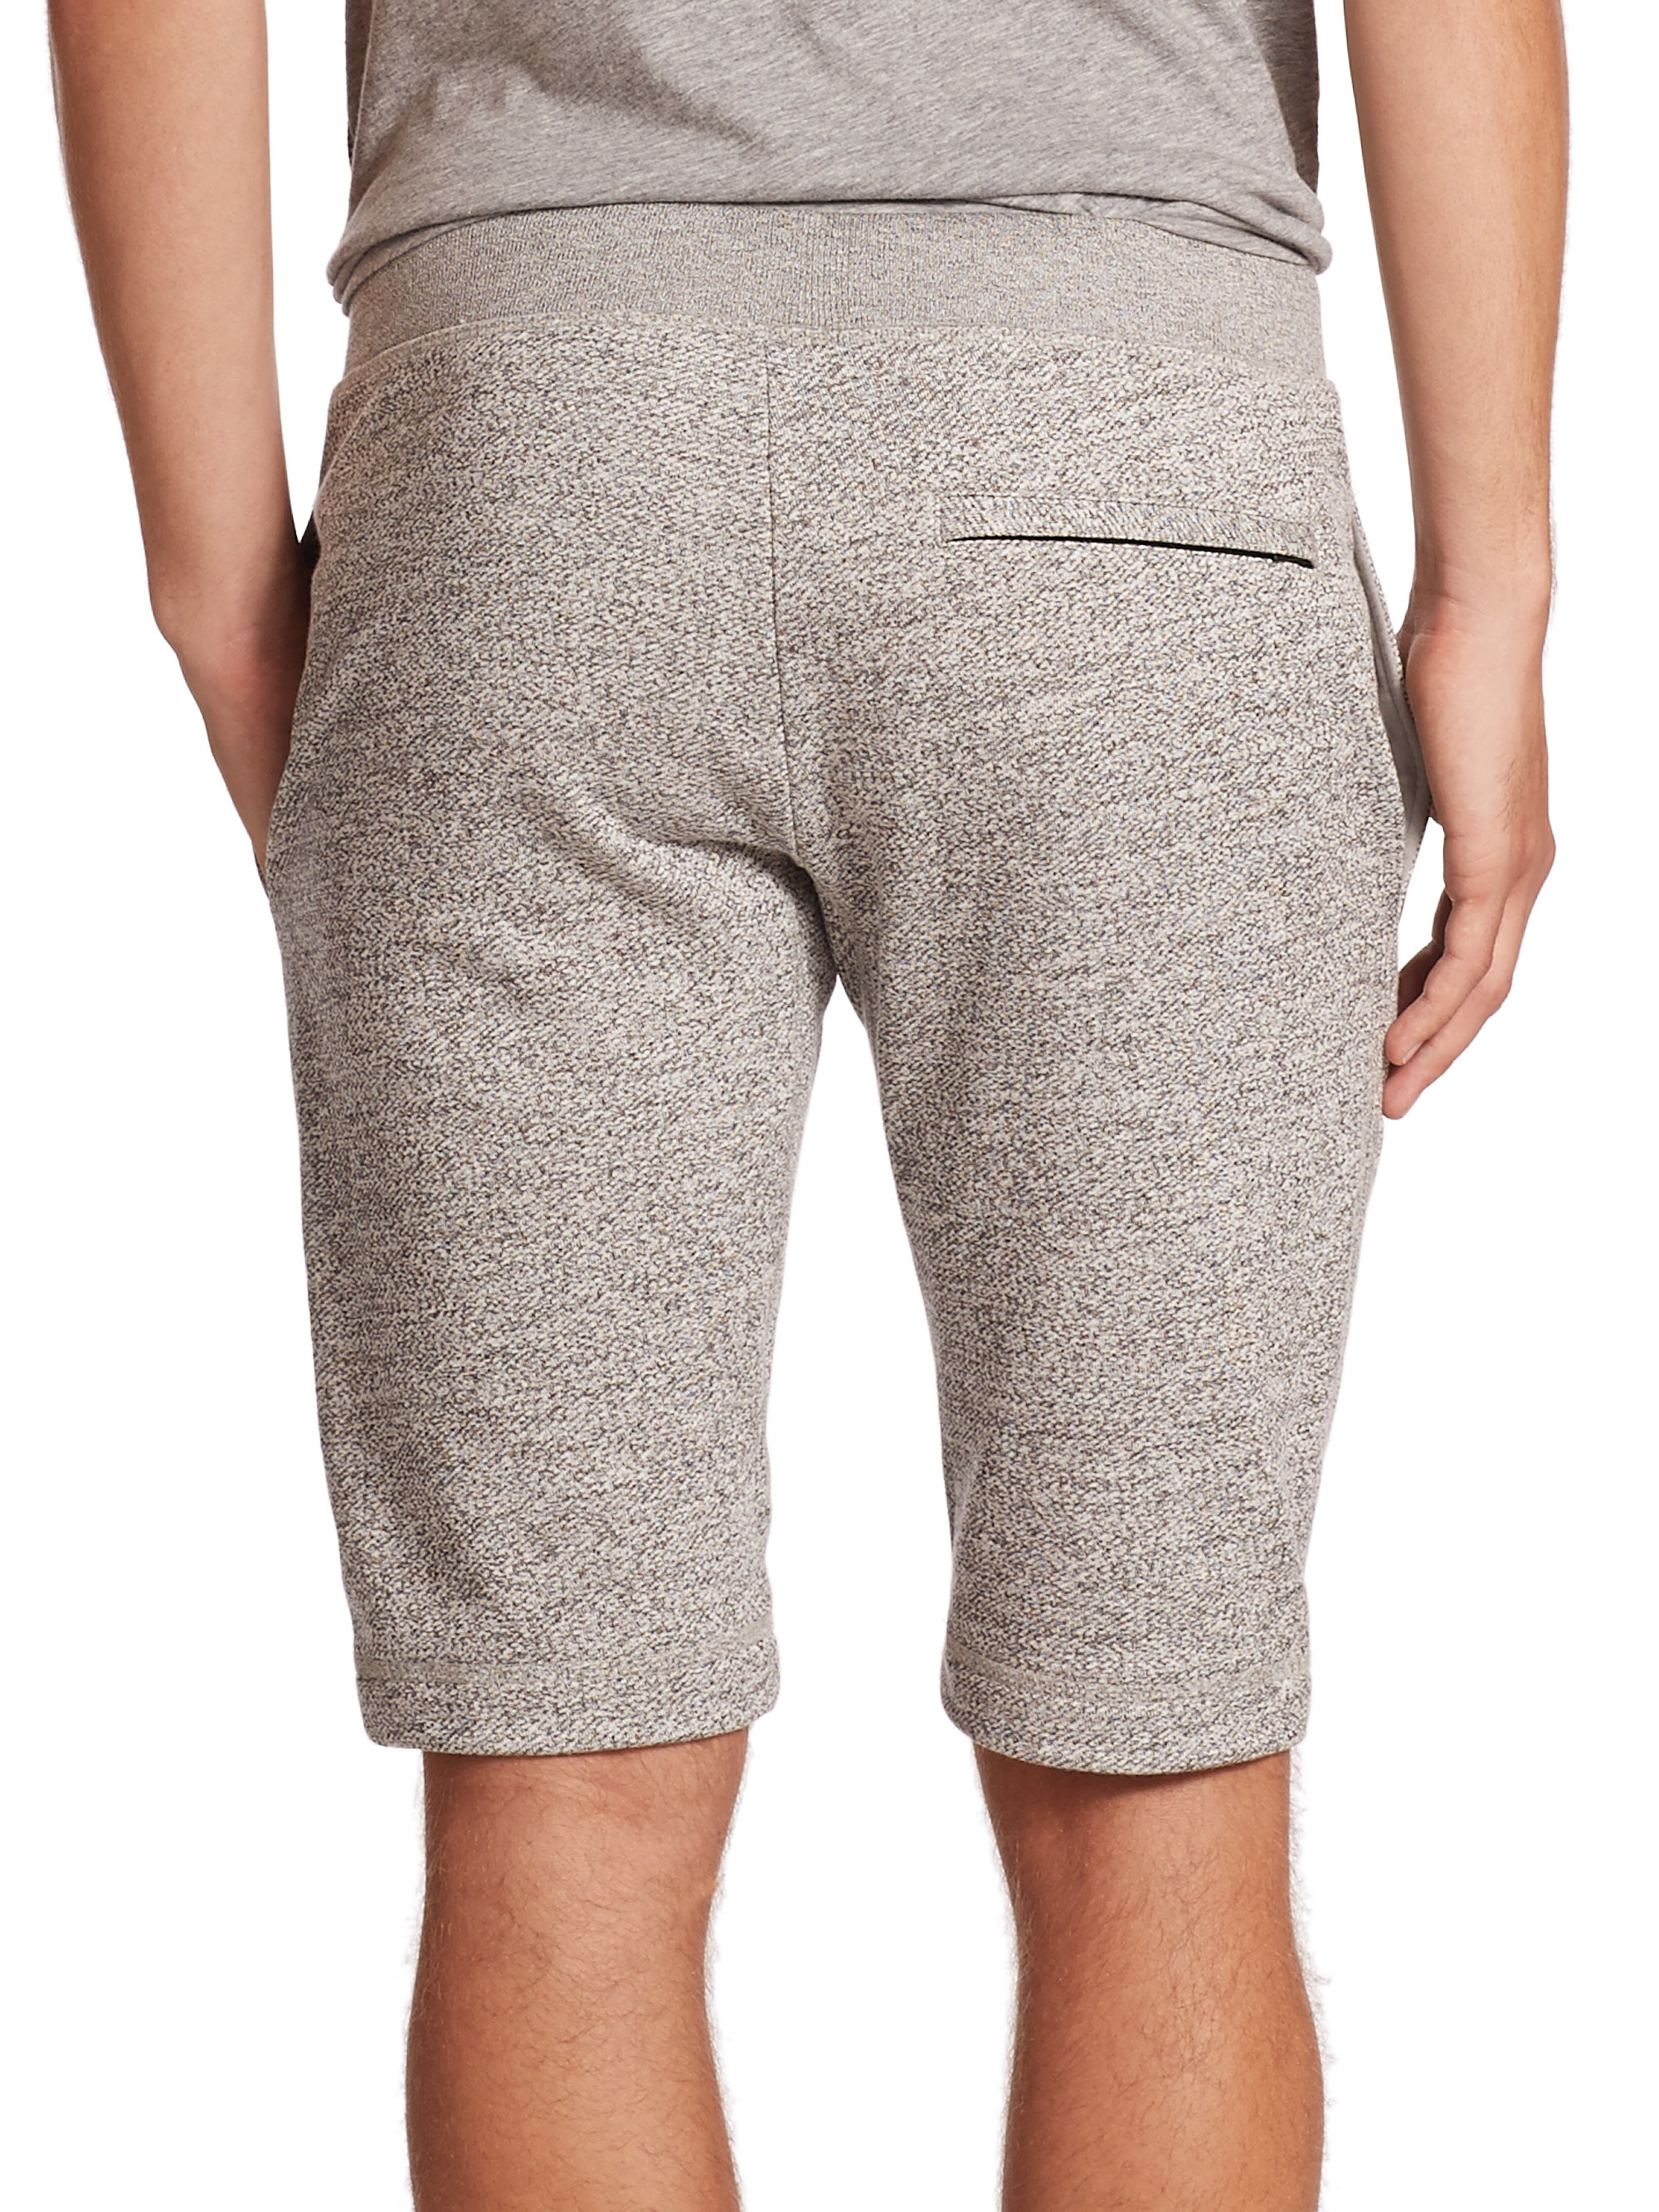 Theory Moris Cotton Sweat Shorts in Grey (Gray) for Men - Lyst